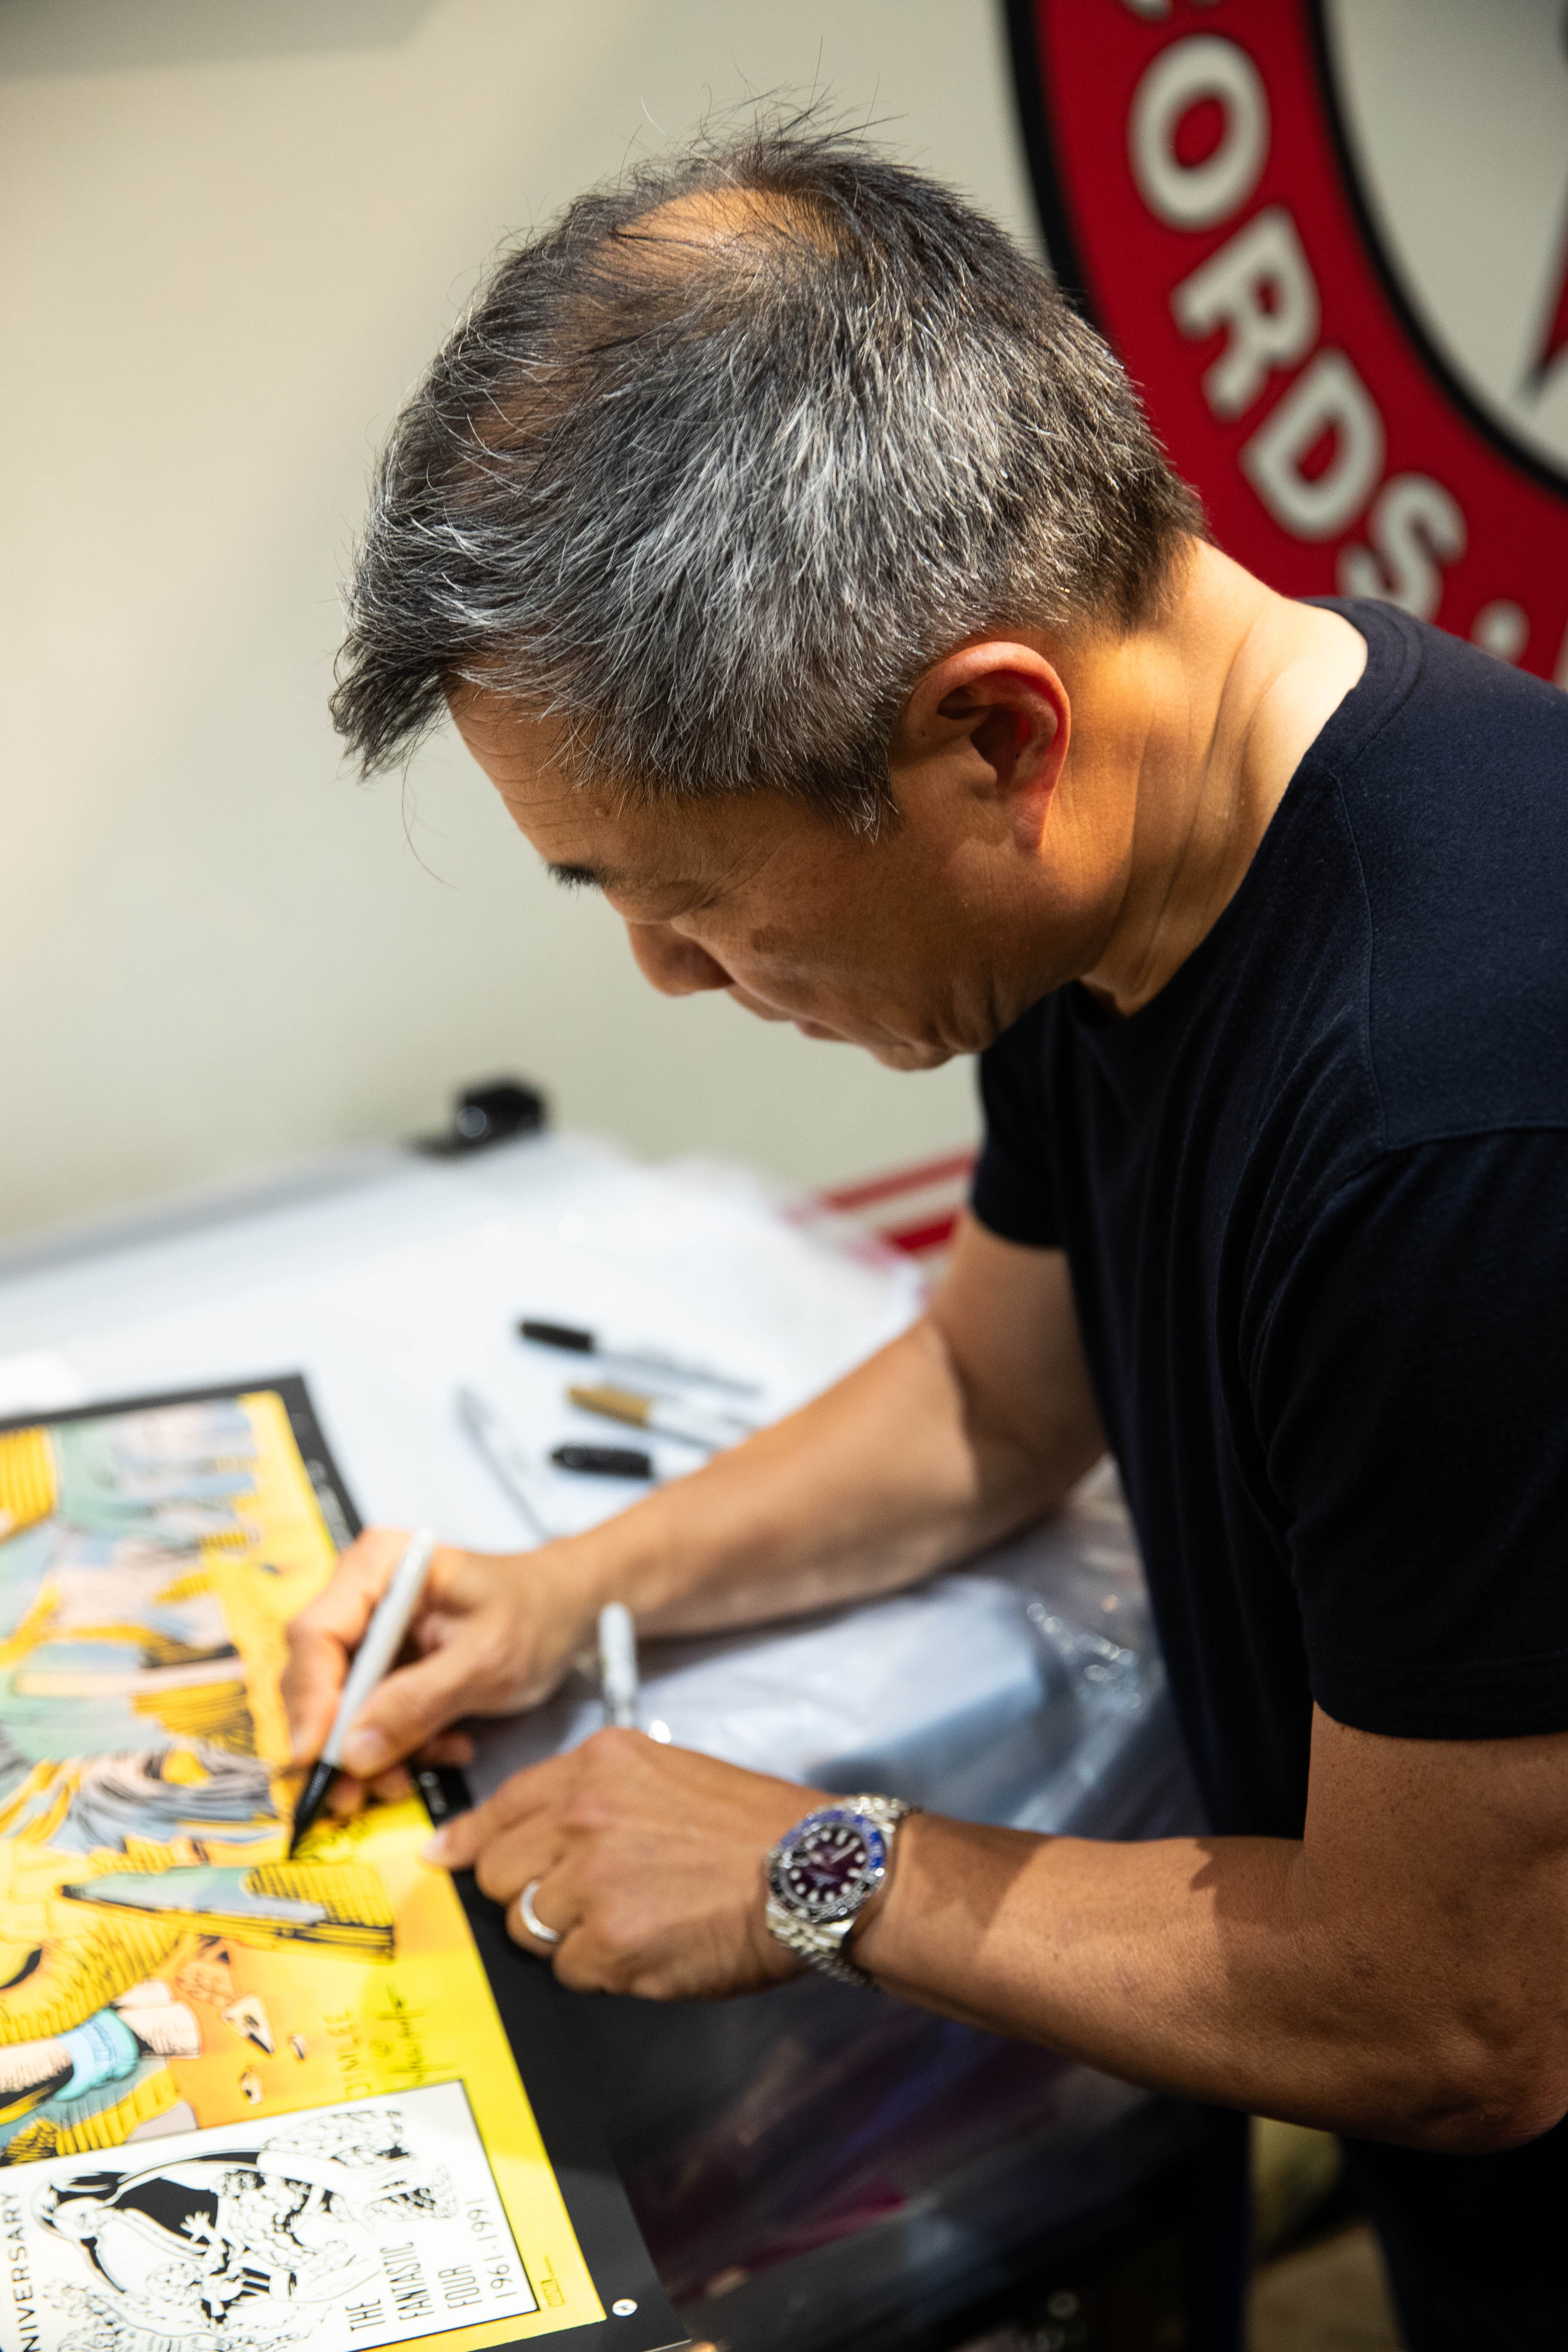 Legendary comic book artist, Jim Lee, stops by Mondo and signs some exclusive posters during SDCC 2023.